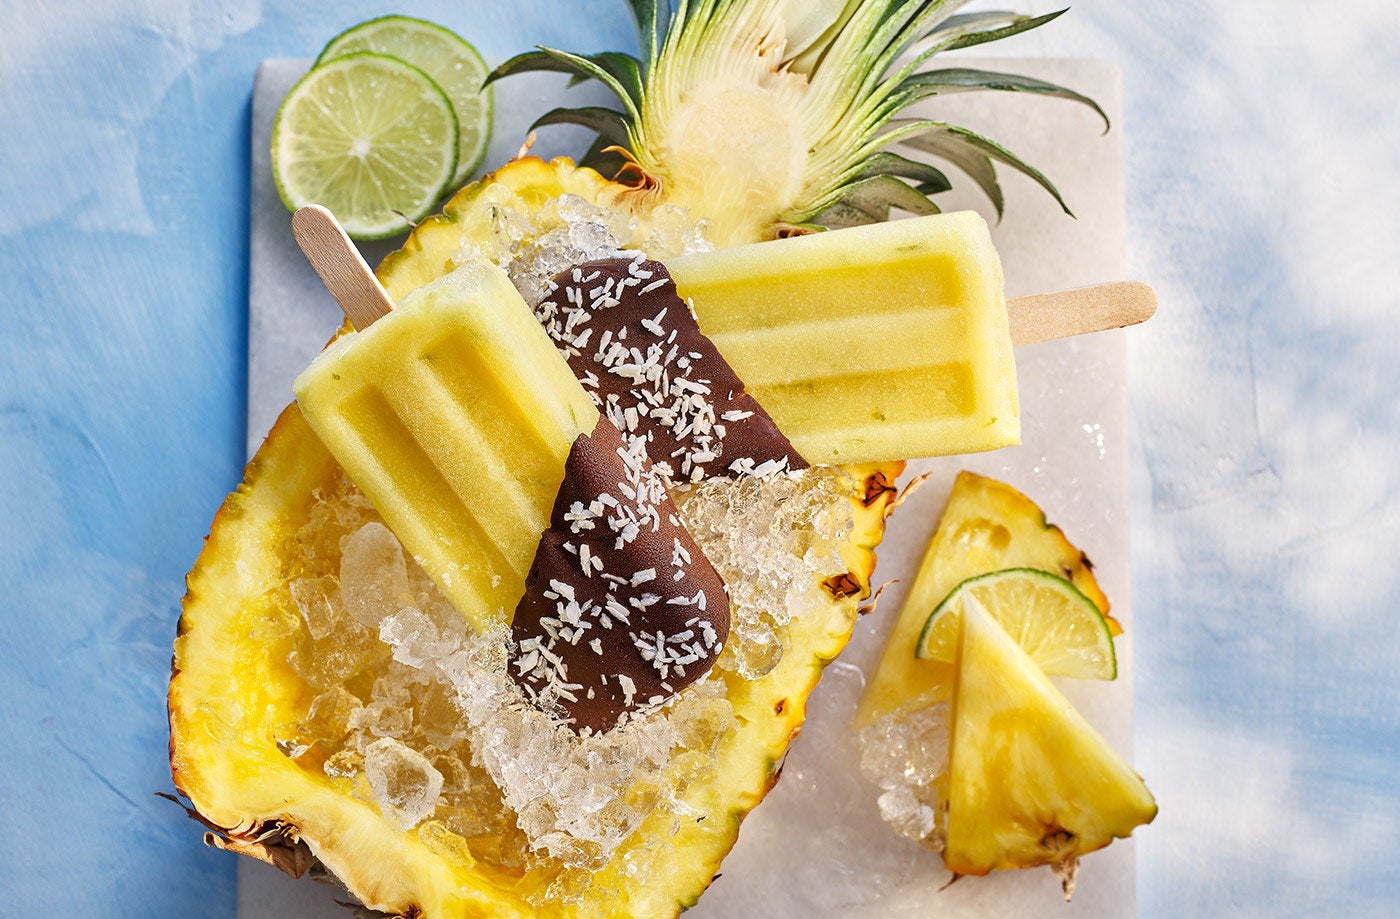 Bring a little bit of beach holiday to your day with these ice lollies